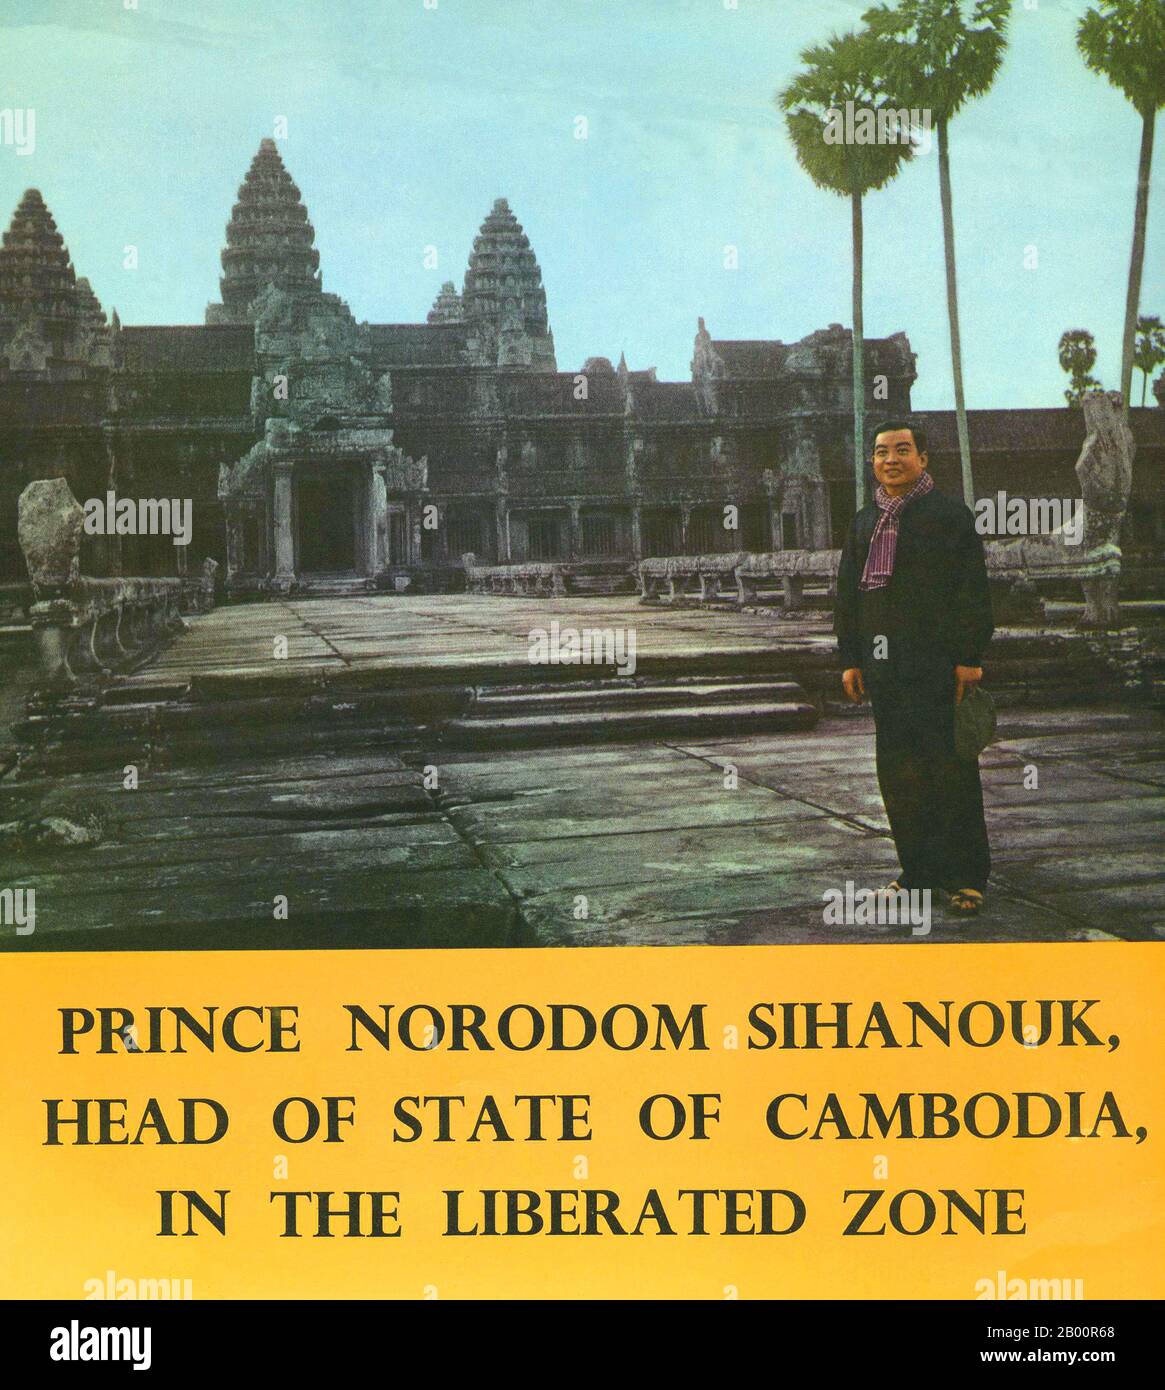 Cambodia: Sihanouk poses in Khmer Rouge black pyjamas and chequered kramar in front of Angkor Wat. Khmer Rouge propaganda pamphlet (1973).  Between 1970 and 1975 Norodom Sihanouk was nominally head of the Khmer Rouge-dominated Royal Government of National Union of Kampuchea (acronym from the French GRUNK), the opposition to Lon Nol's pro-American Khmer Republic. In 1973 he travelled from Beijing to the Khmer Rouge 'liberated zone' of Cambodia for propaganda purposes. Stock Photo